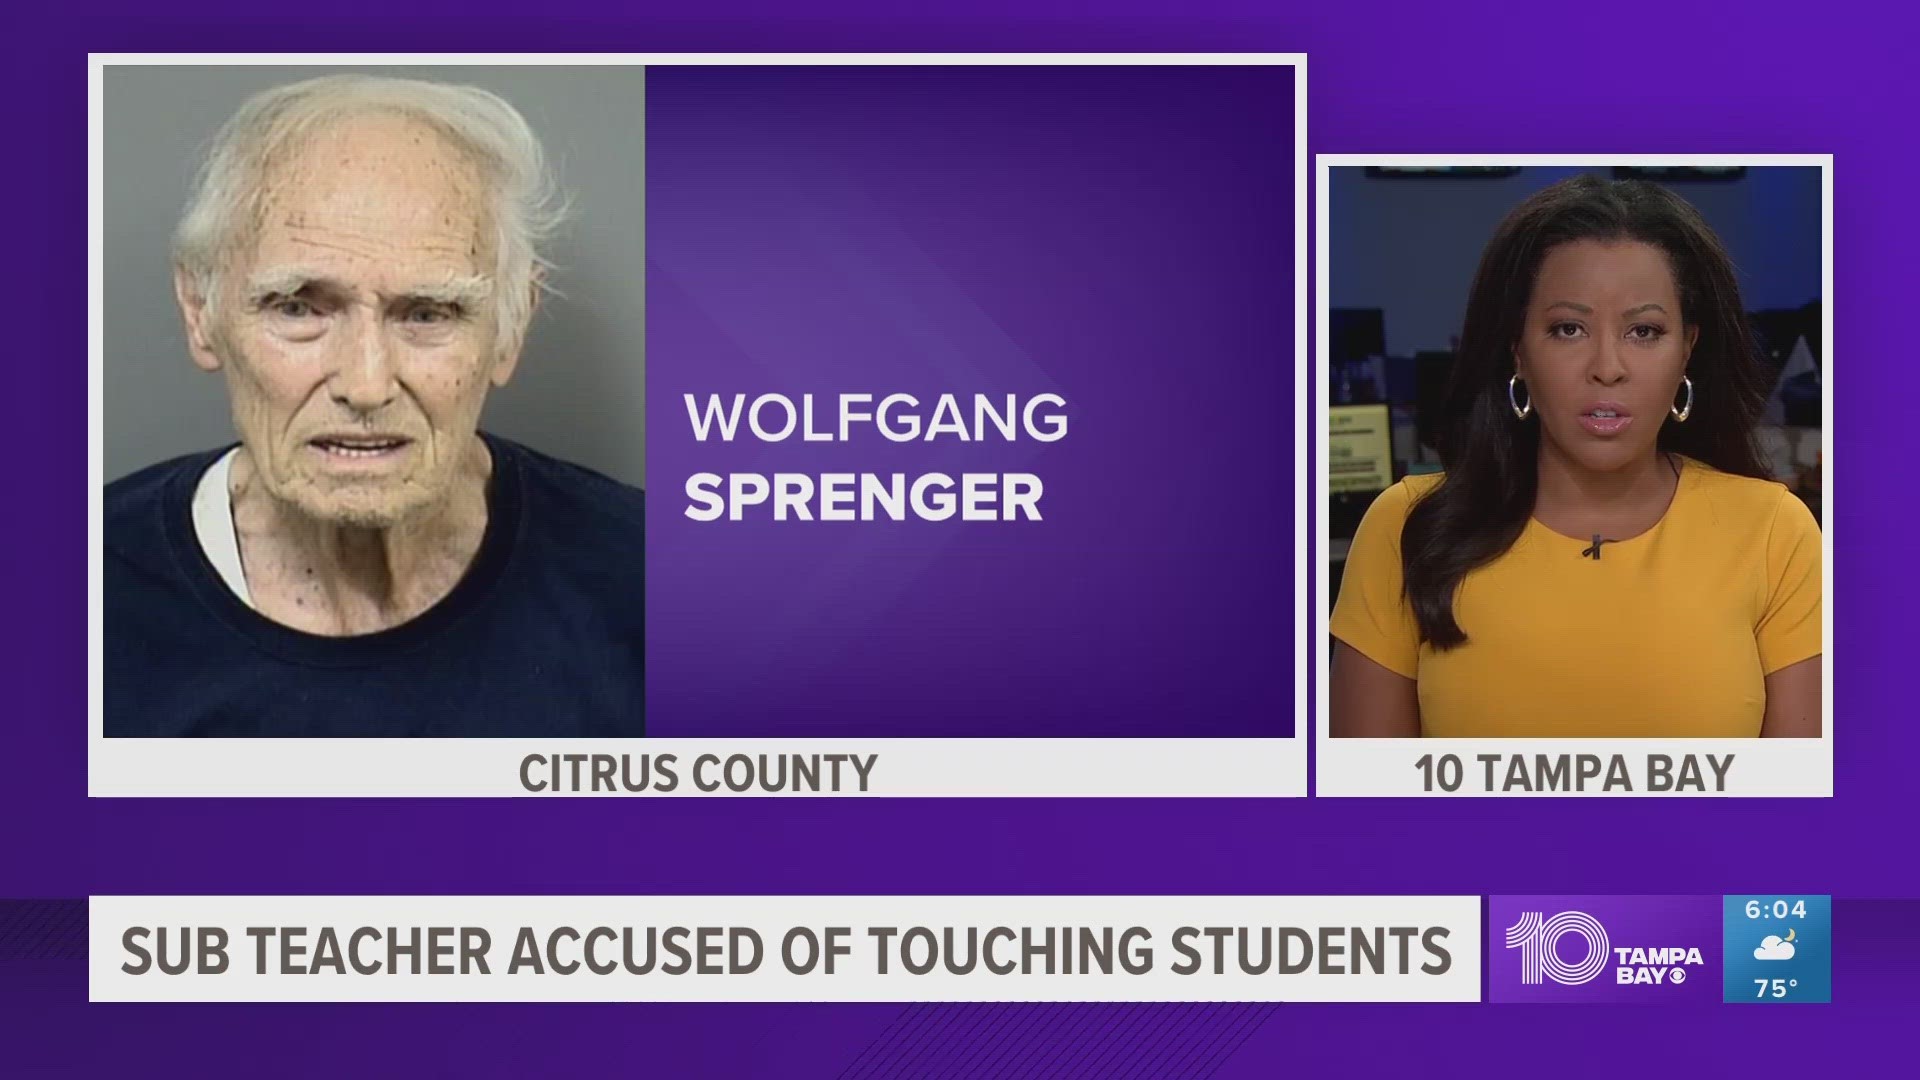 Wolfgang Sprenger, 84, is accused of inappropriately touching six students.